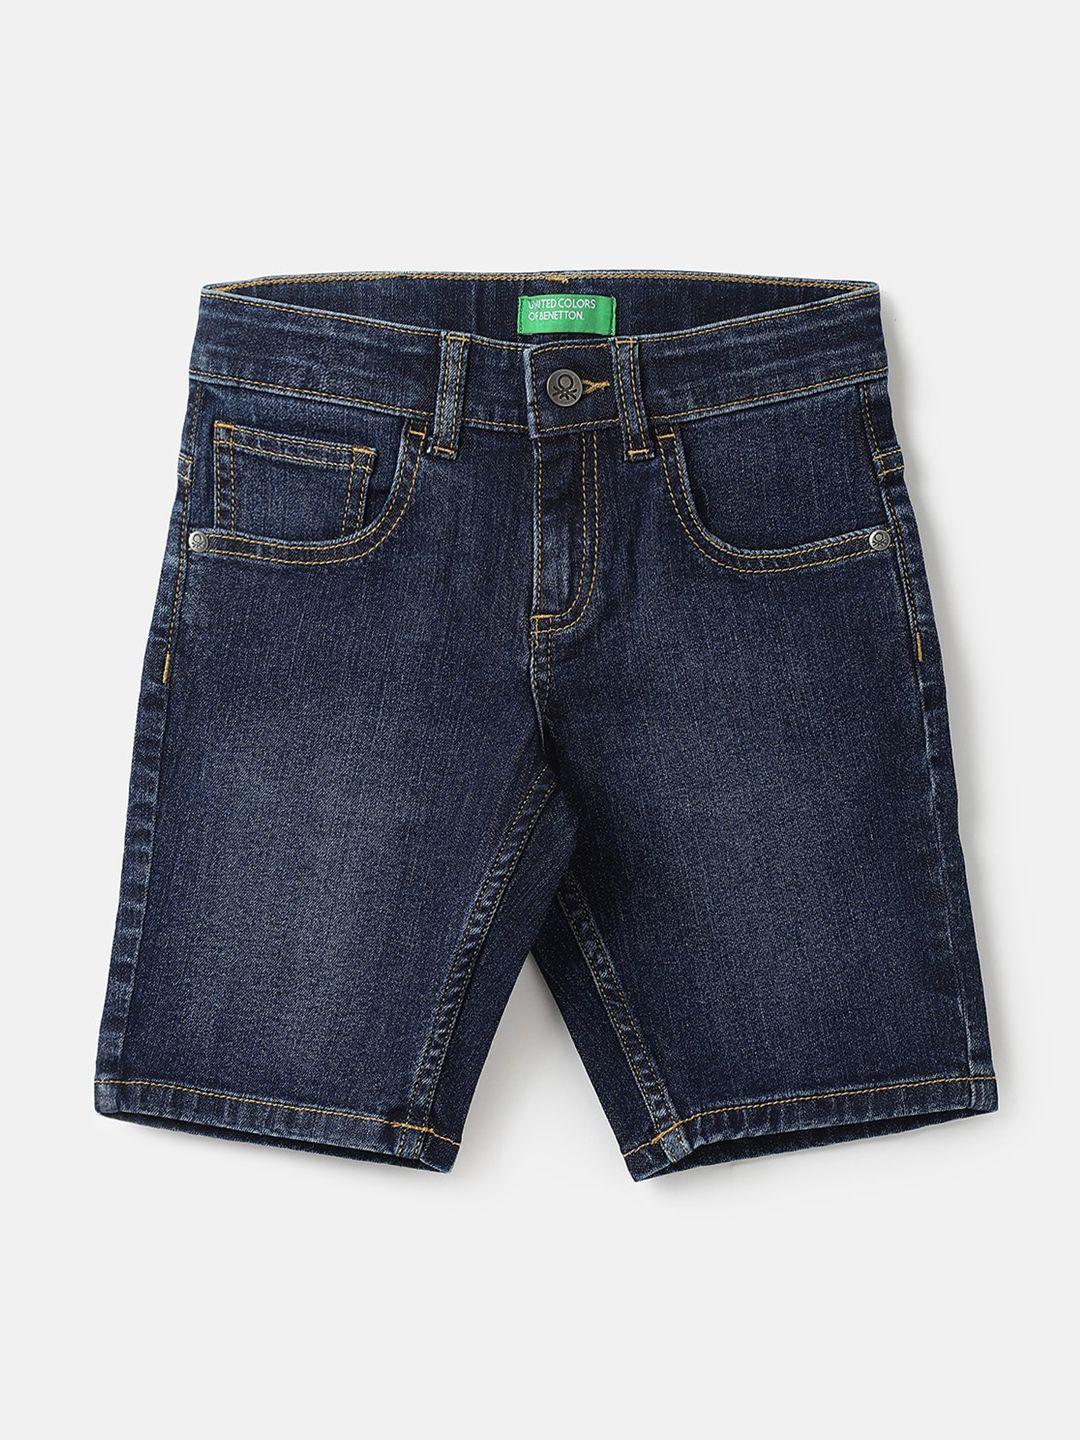 united colors of benetton boys regular fit washed cotton denim shorts